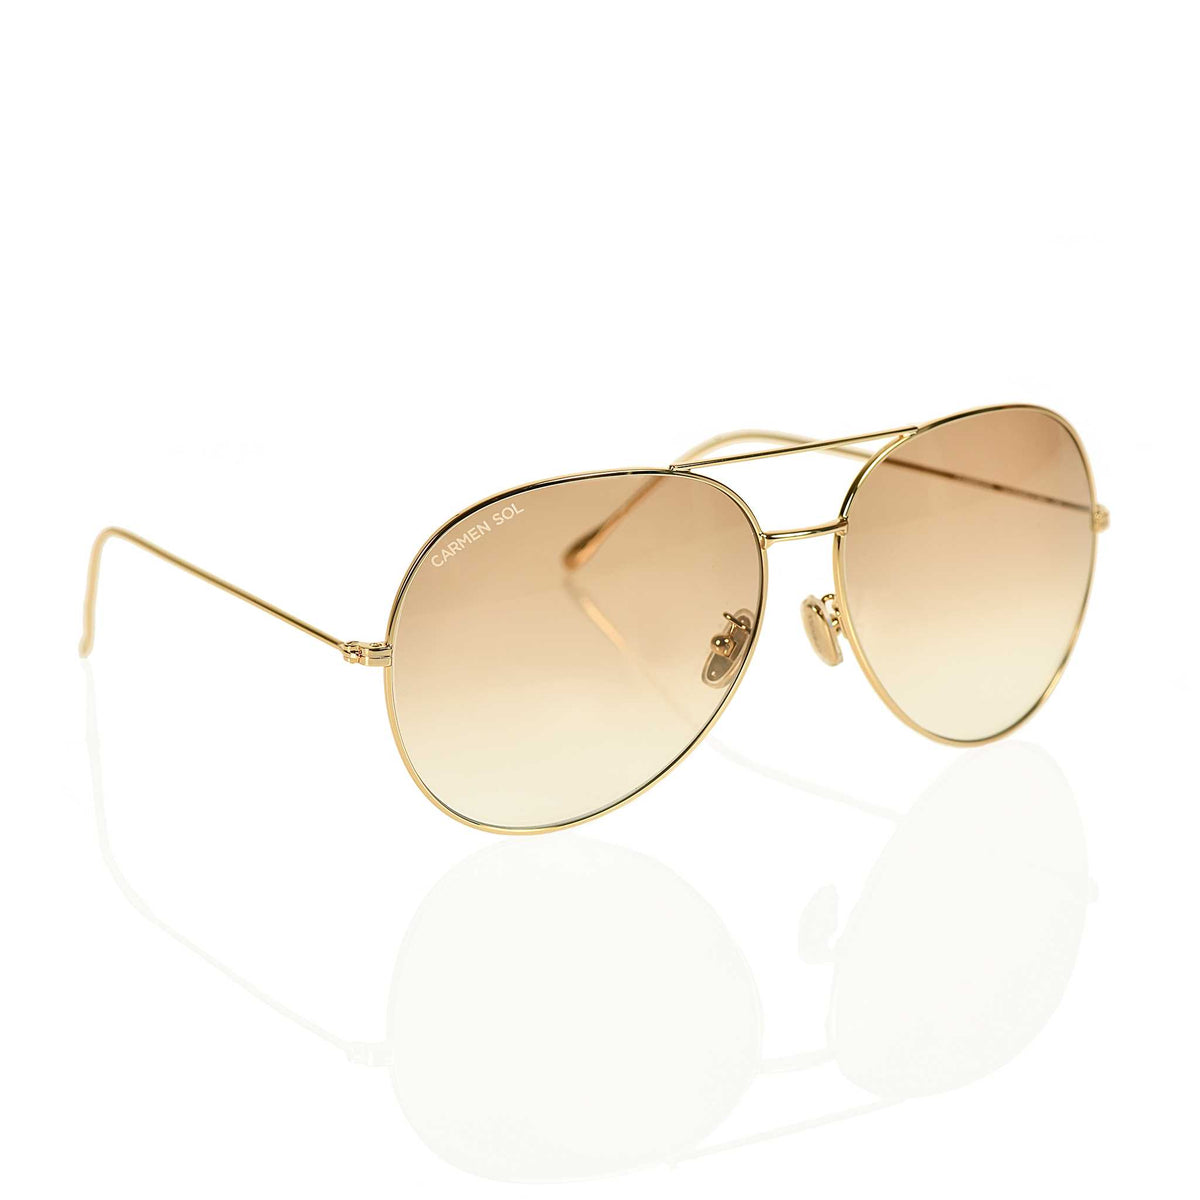 Aviator sunglasses for women with nude color lenses